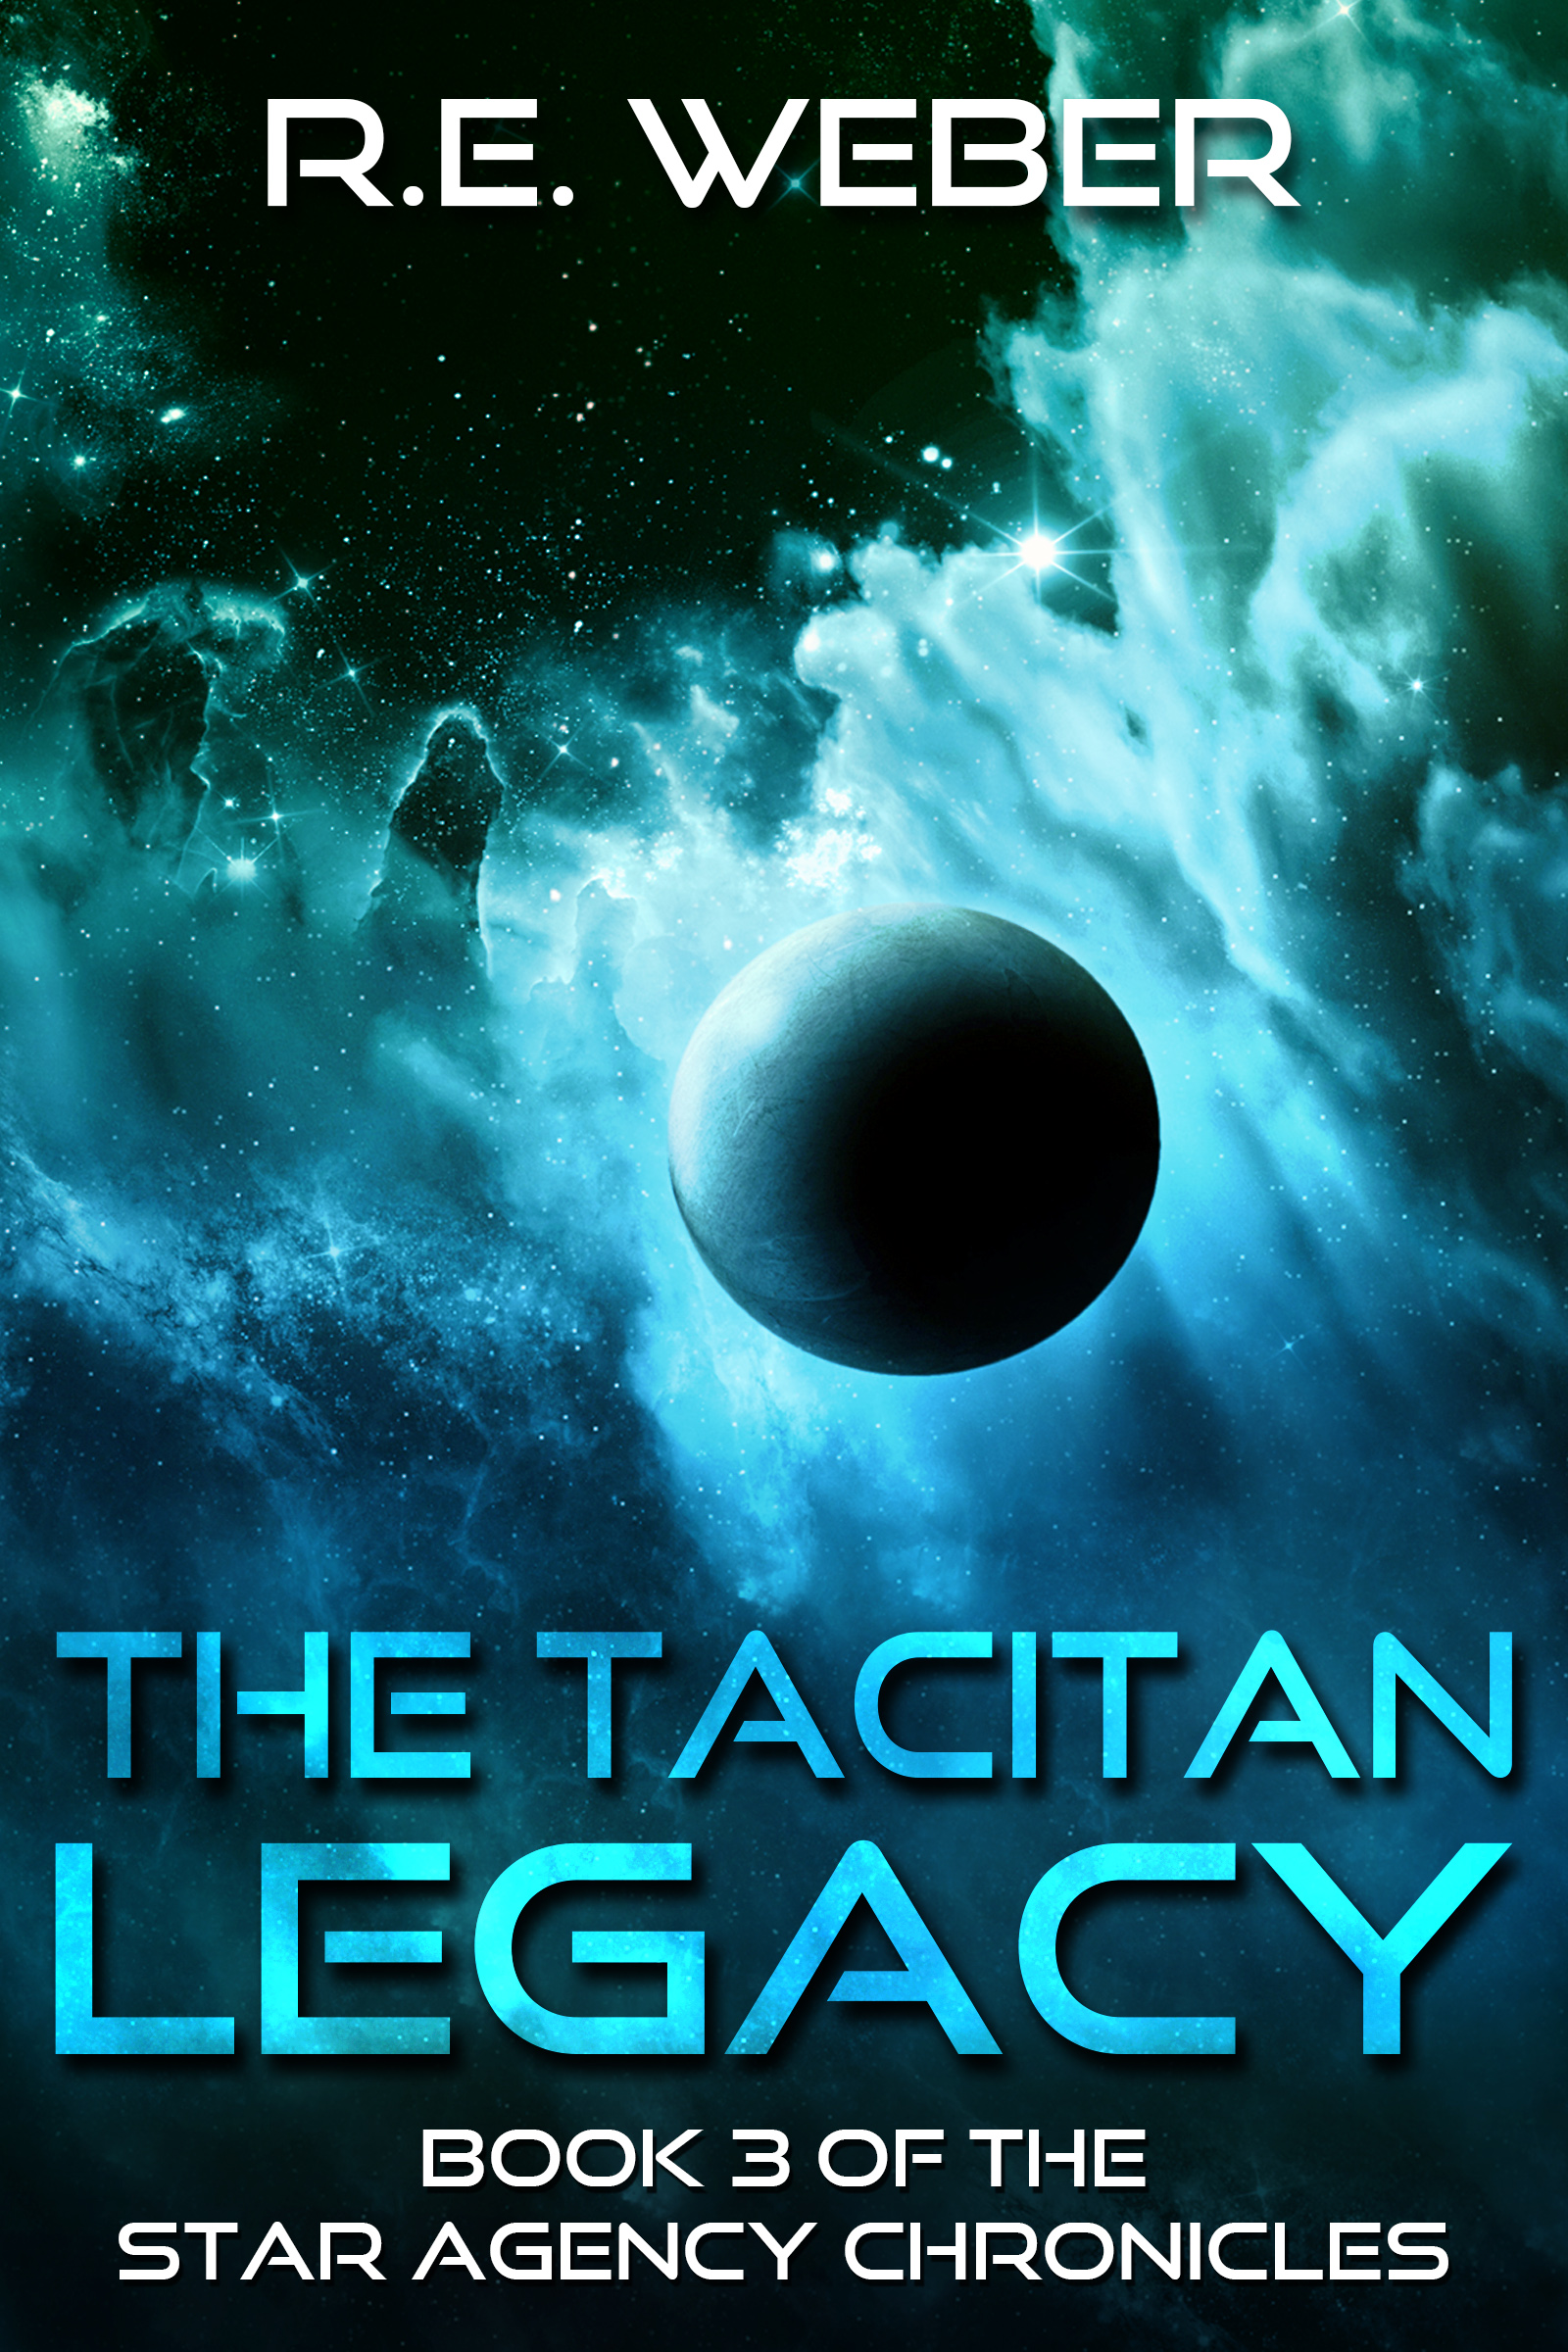 FREE: The Tacitan Legacy (The Star Agency Chronicles Book 3) by R.E.Weber